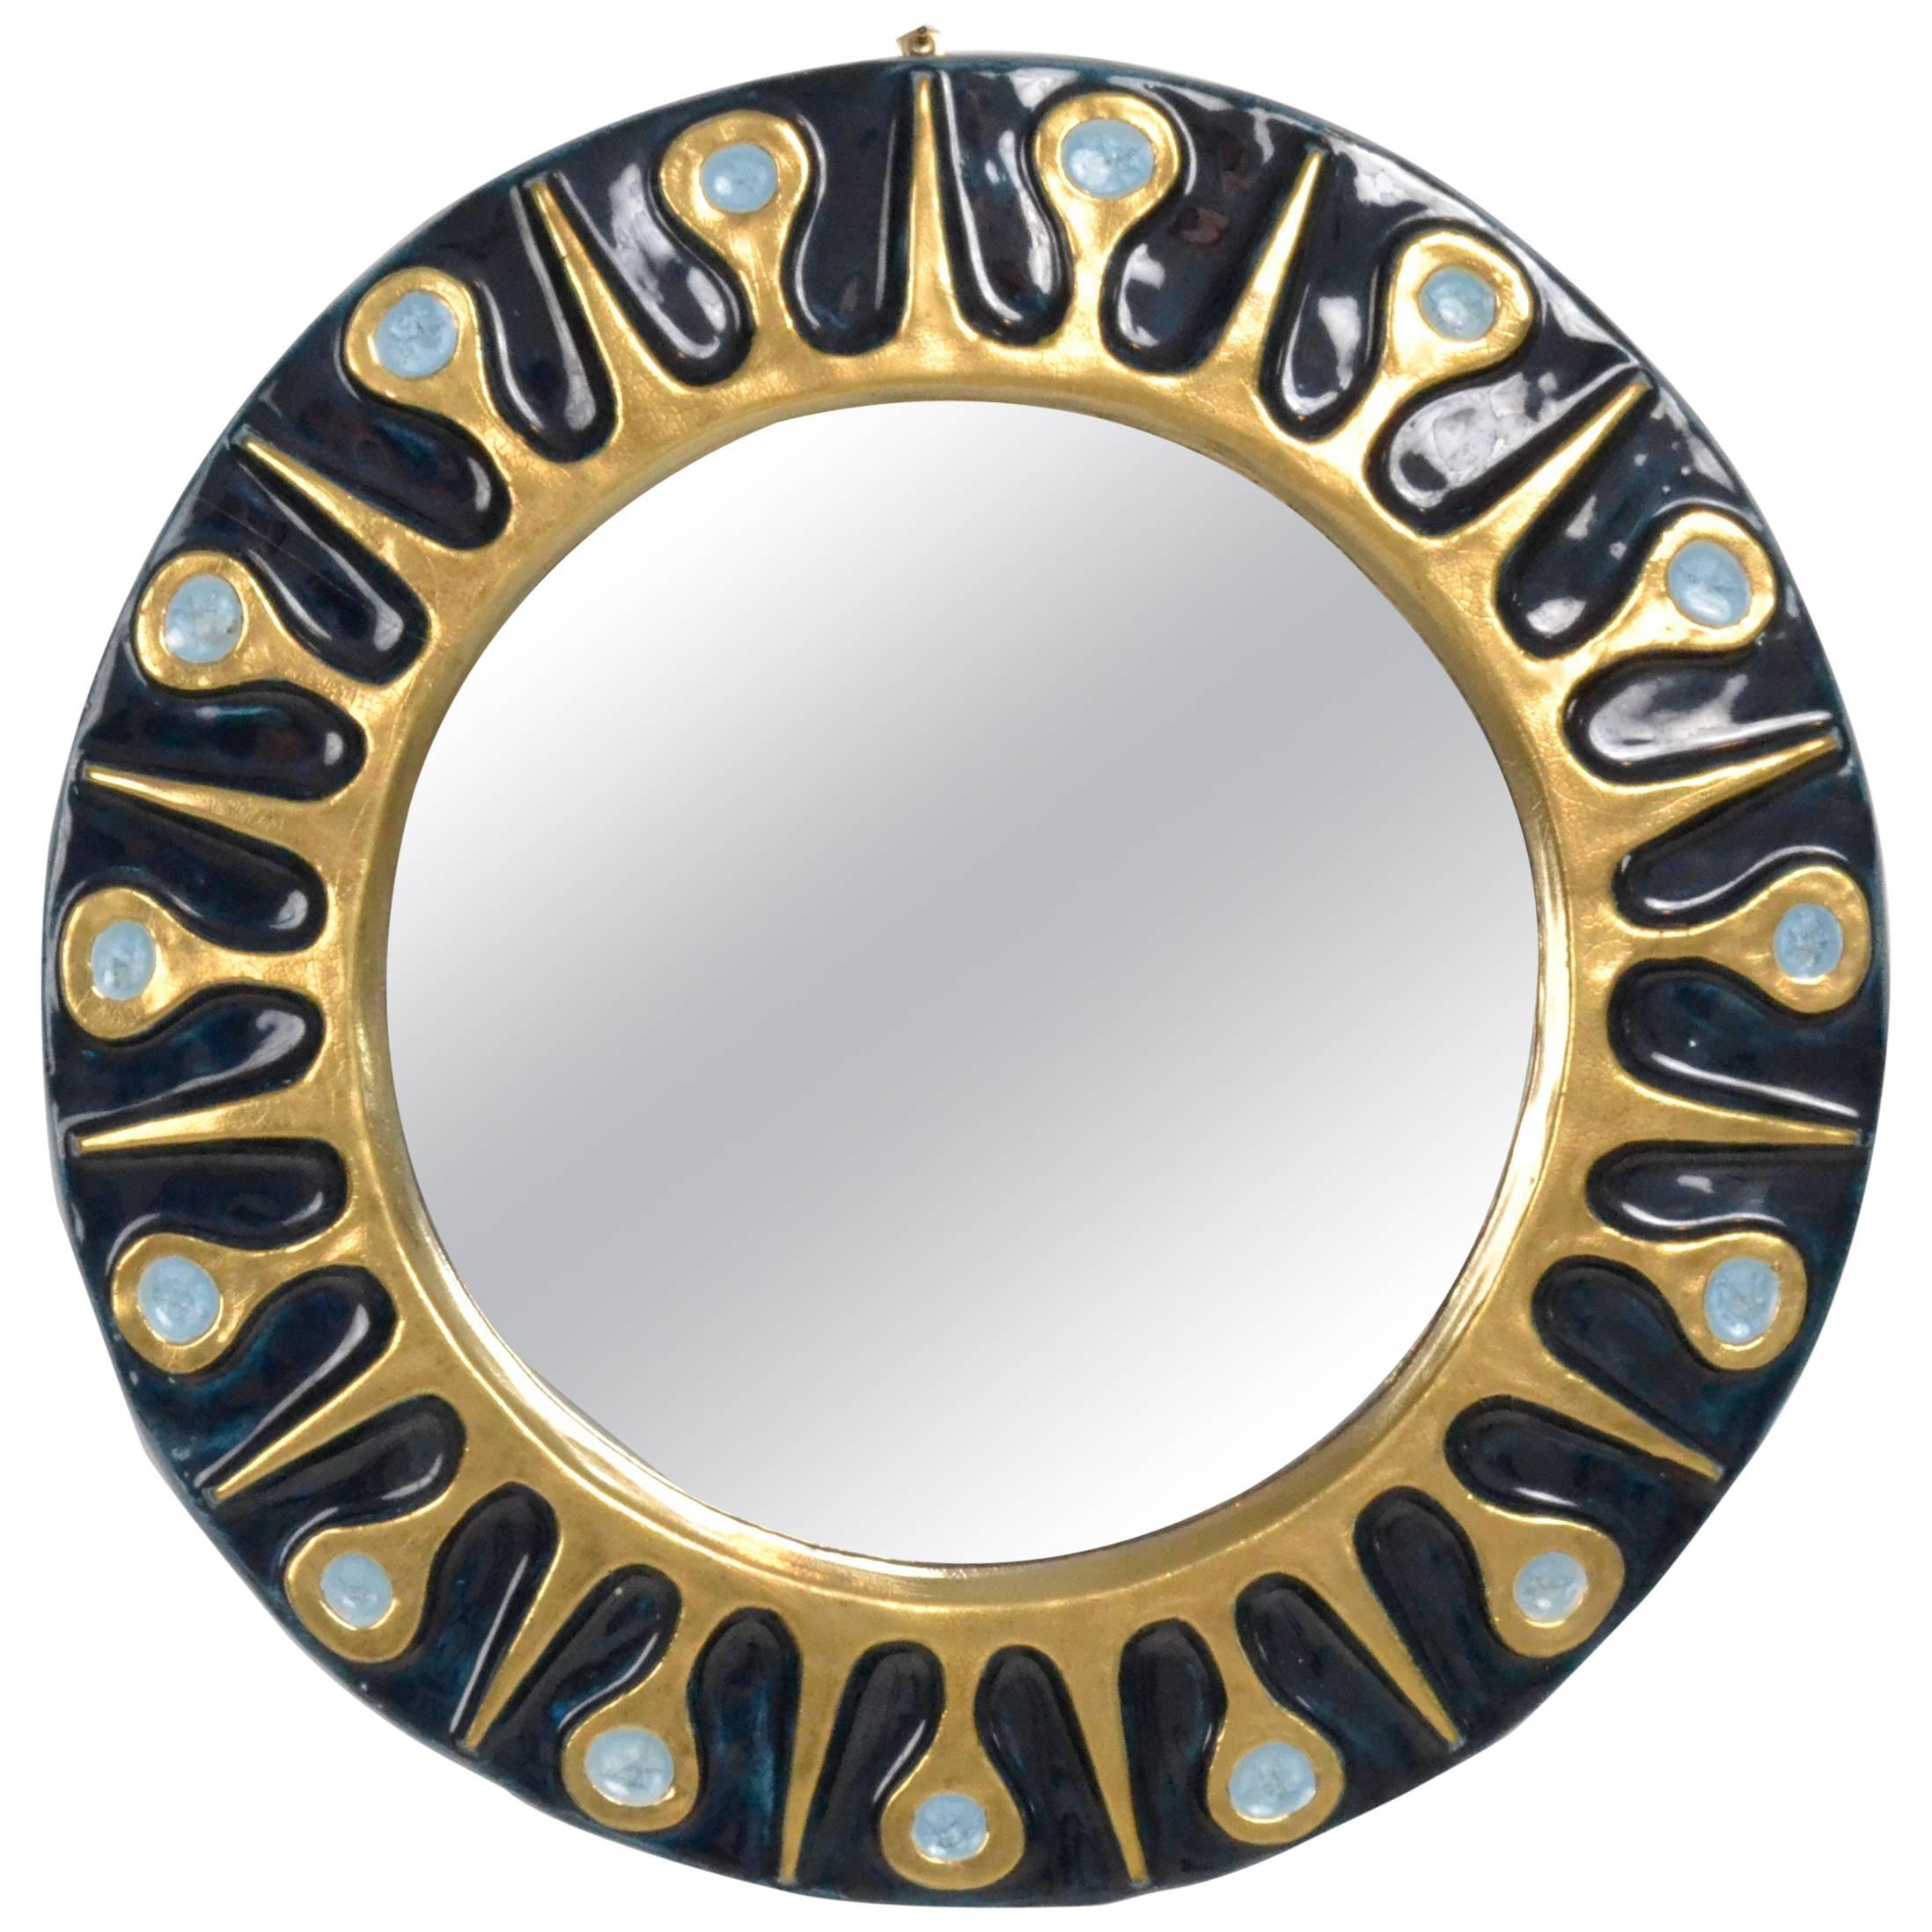 Ceramic Mirror with Crackled Glass Detail